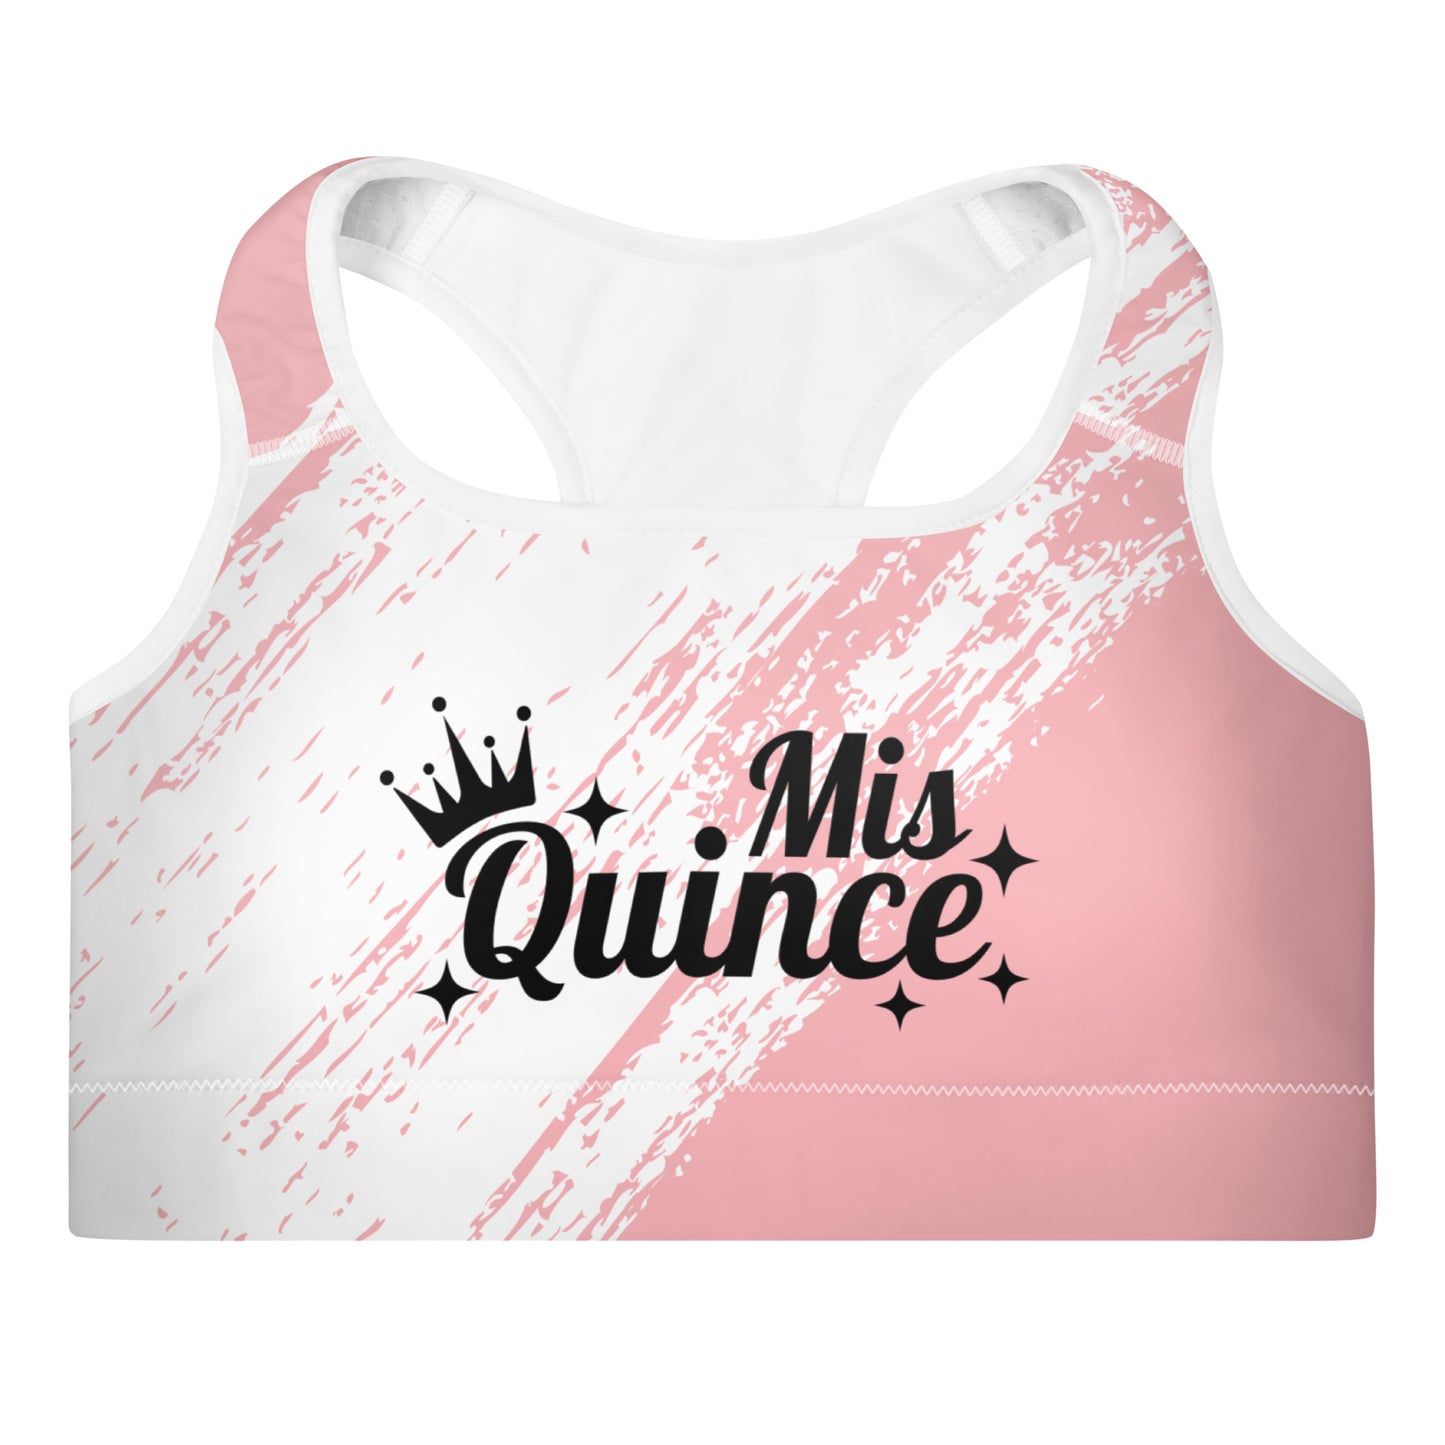 Mis Quince Padded Sports Bra